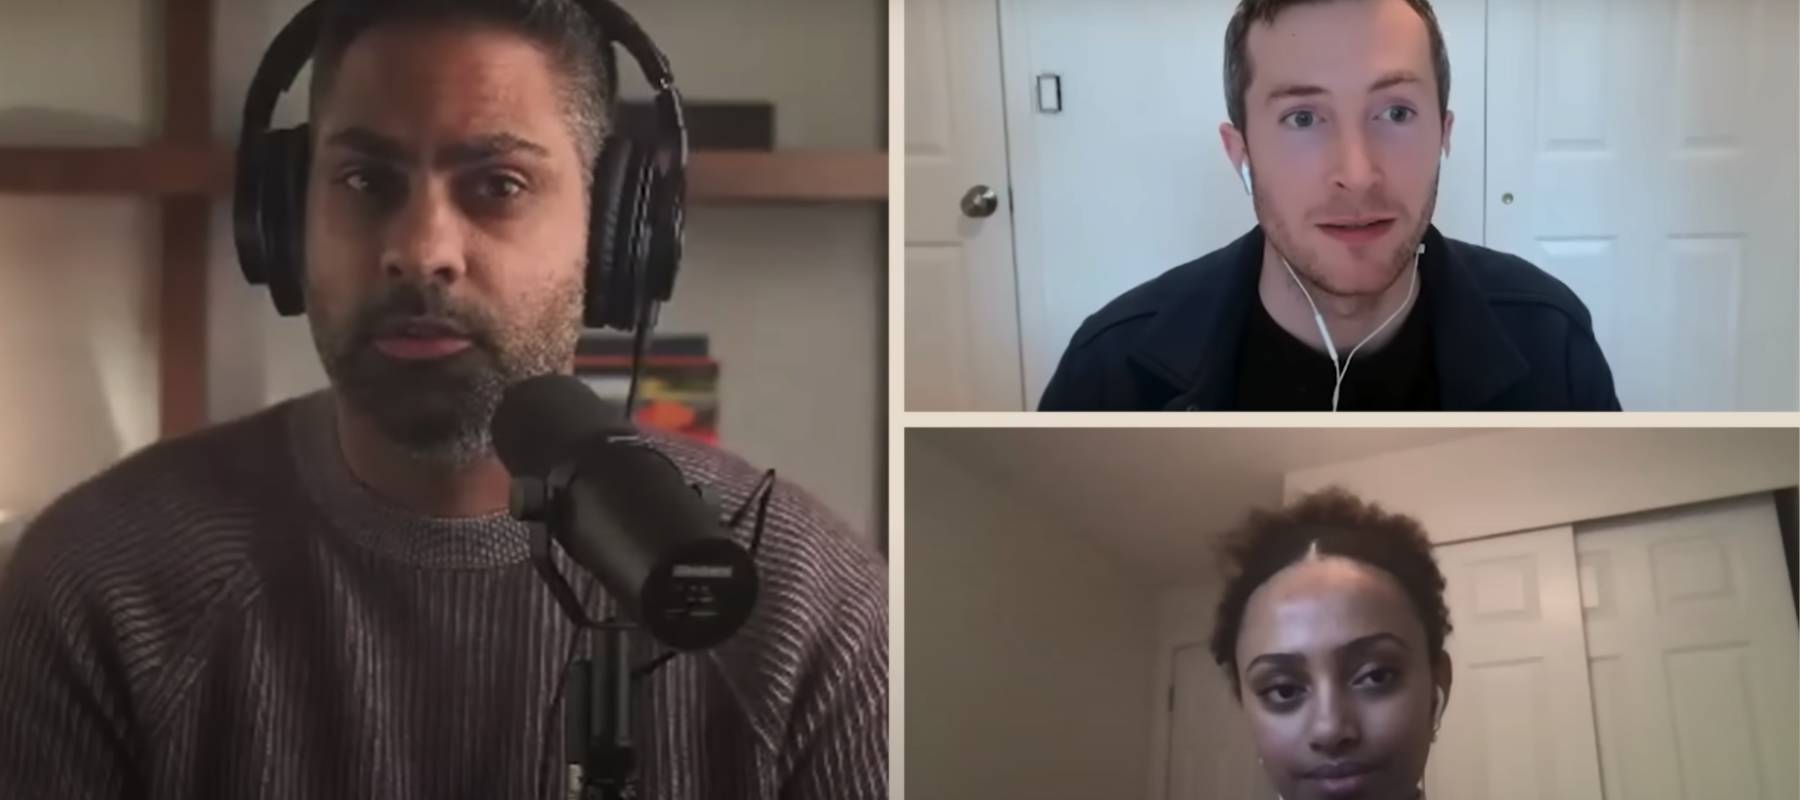 Three people seen calling into a video chat, all three looking serious with headphones on.